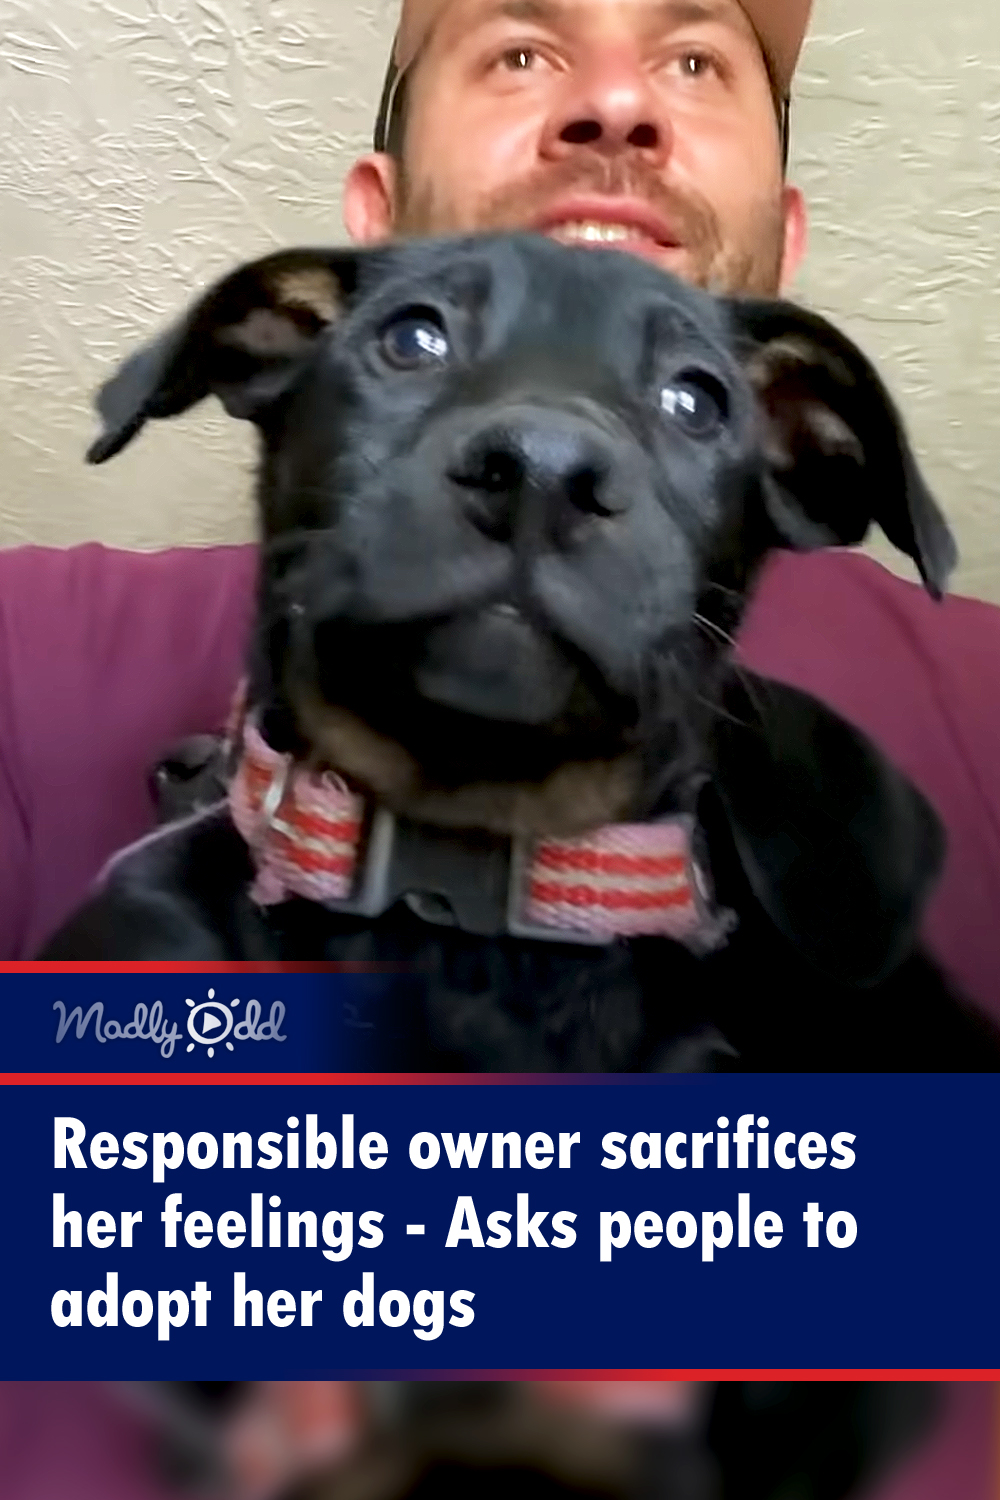 Responsible owner sacrifices her feelings - Asks people to adopt her dogs